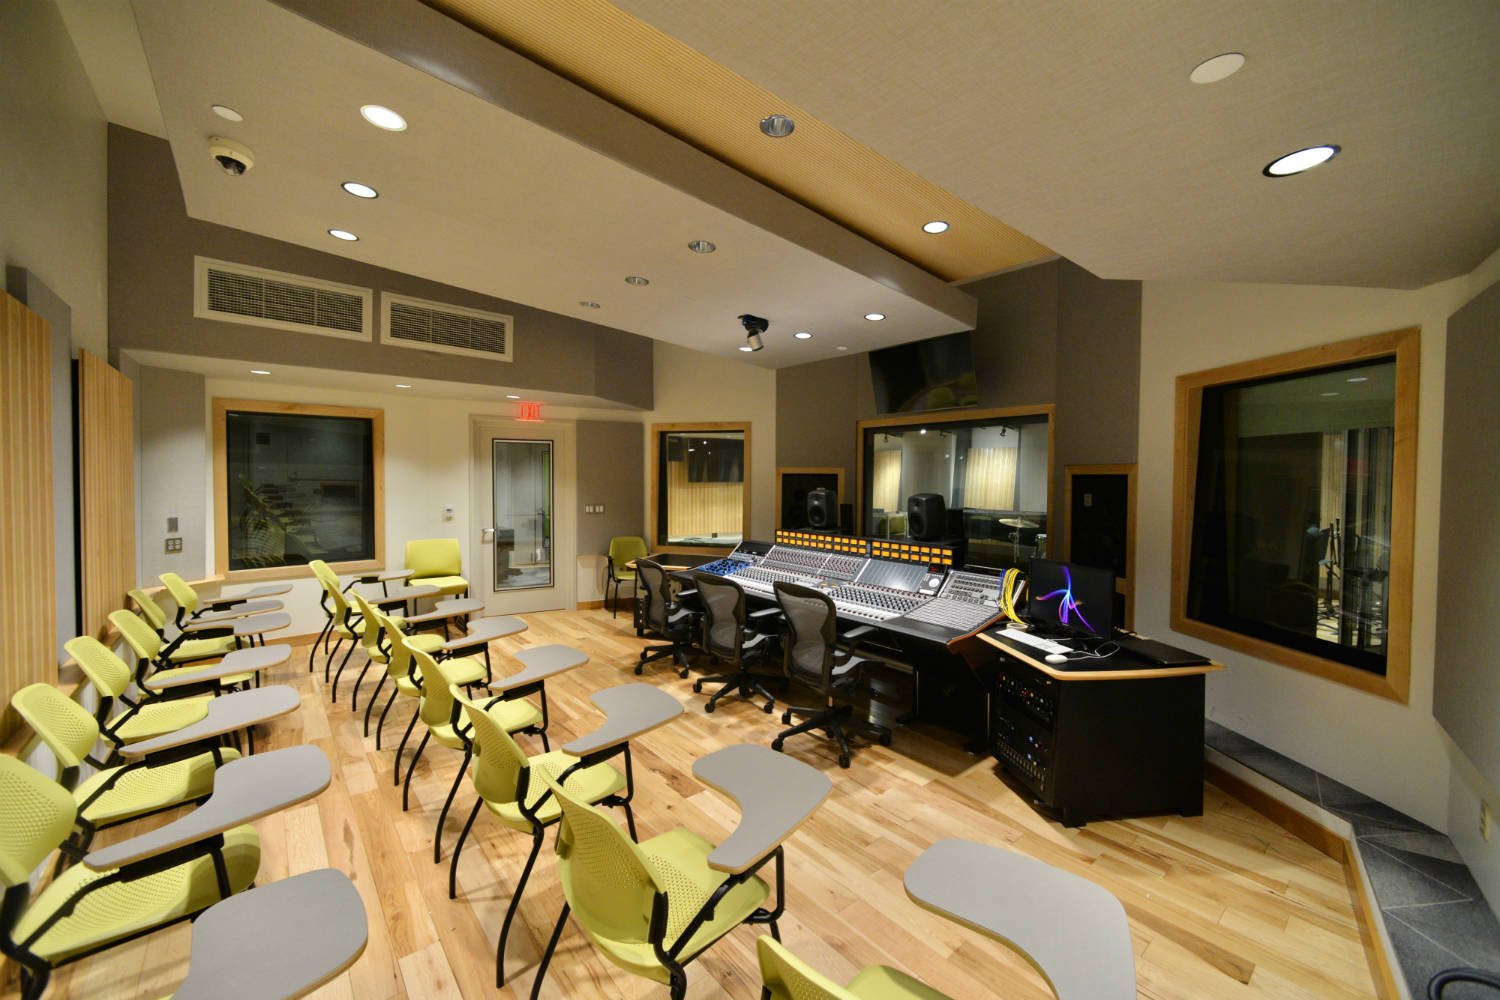 Drexel University in Philadelphia, PA is one of America's 15 largest universities. Their brand-new recording facilities, designed by the WSDG team, expands their music and recording program. Control Room Side View